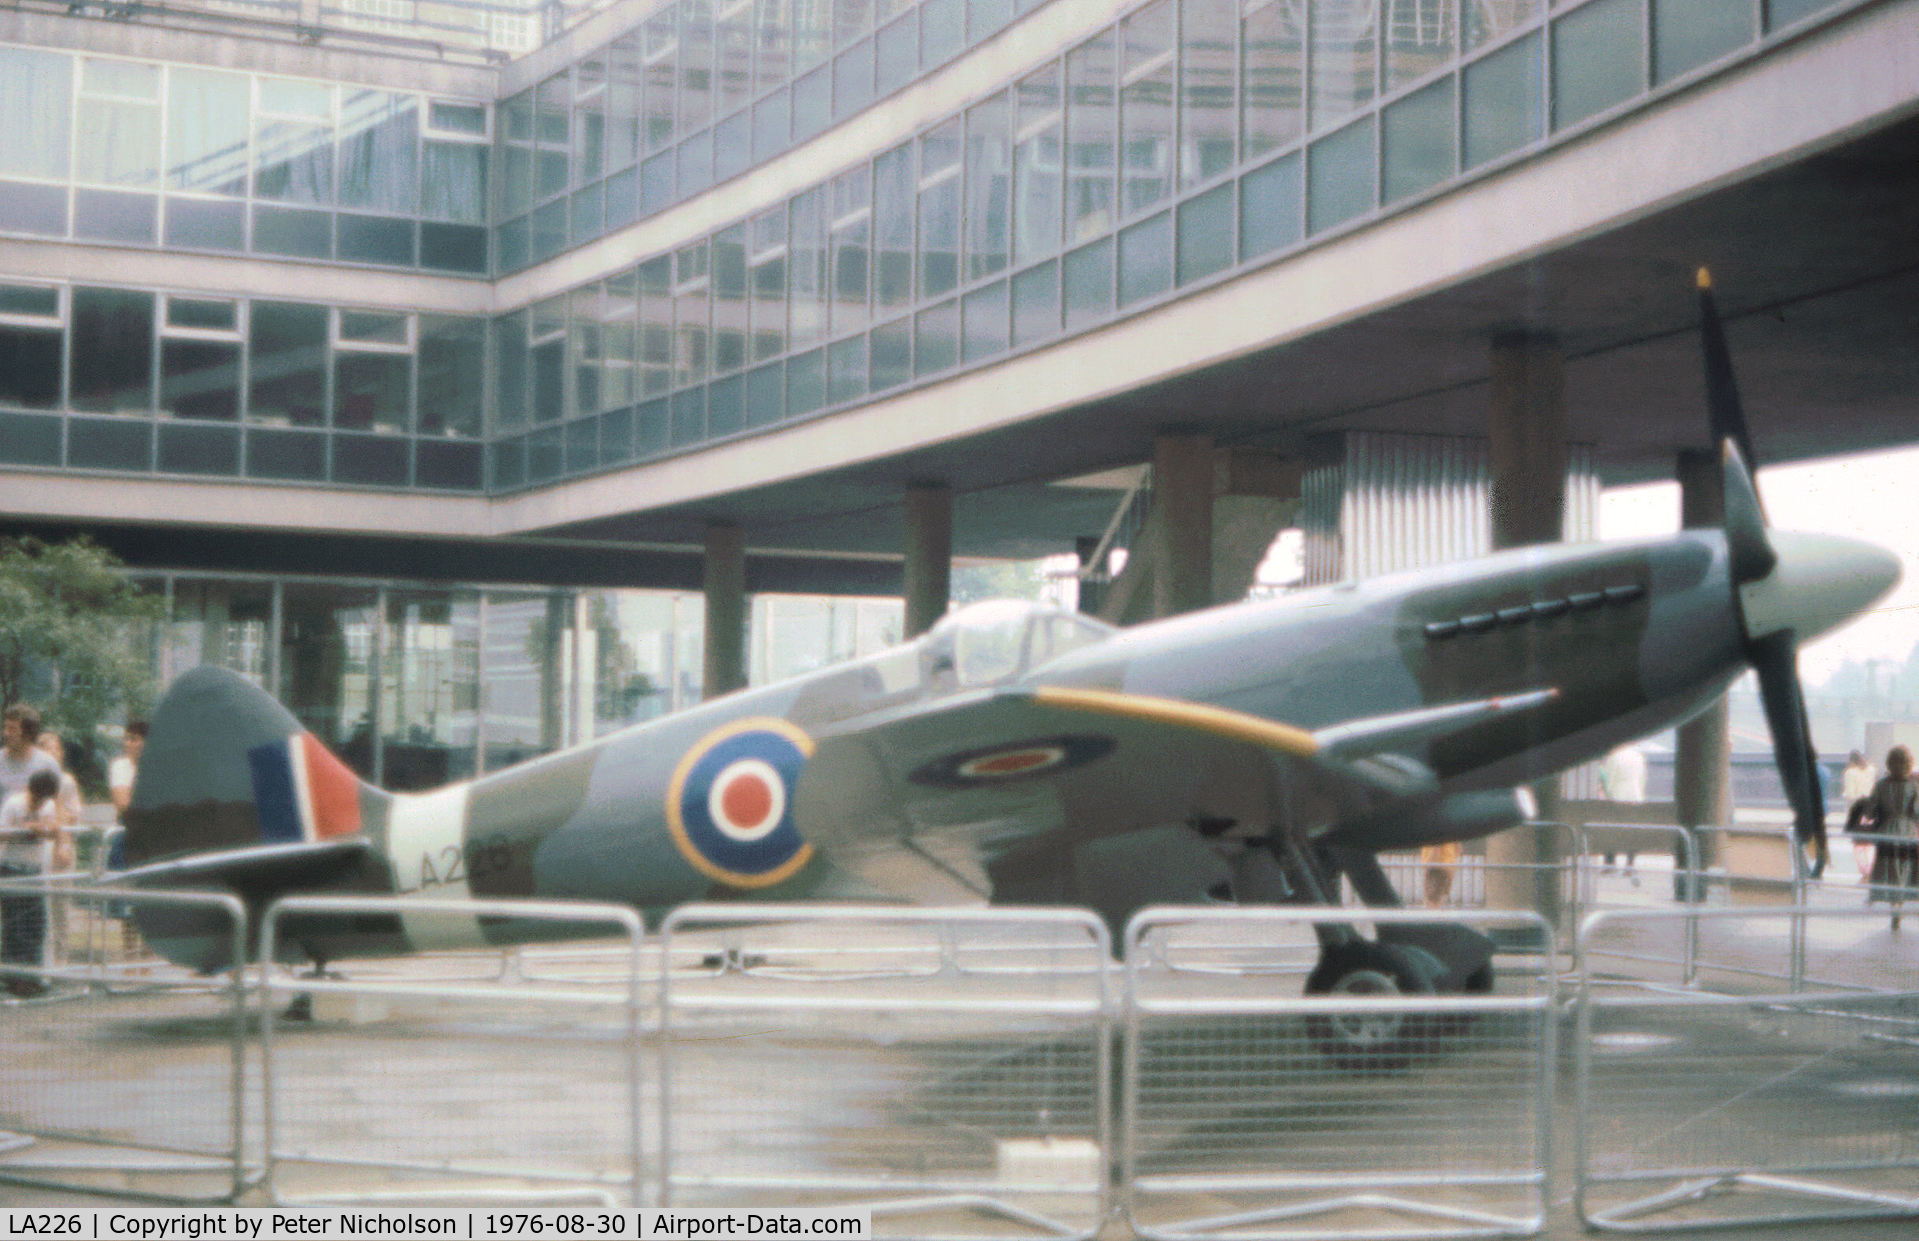 LA226, 1945 Supermarine 356 Spitfire F.21 C/N SMAF.4371, Spitfire F.21 with RAF Maintenance serial 7119M on display in London in the Summer of 1976.